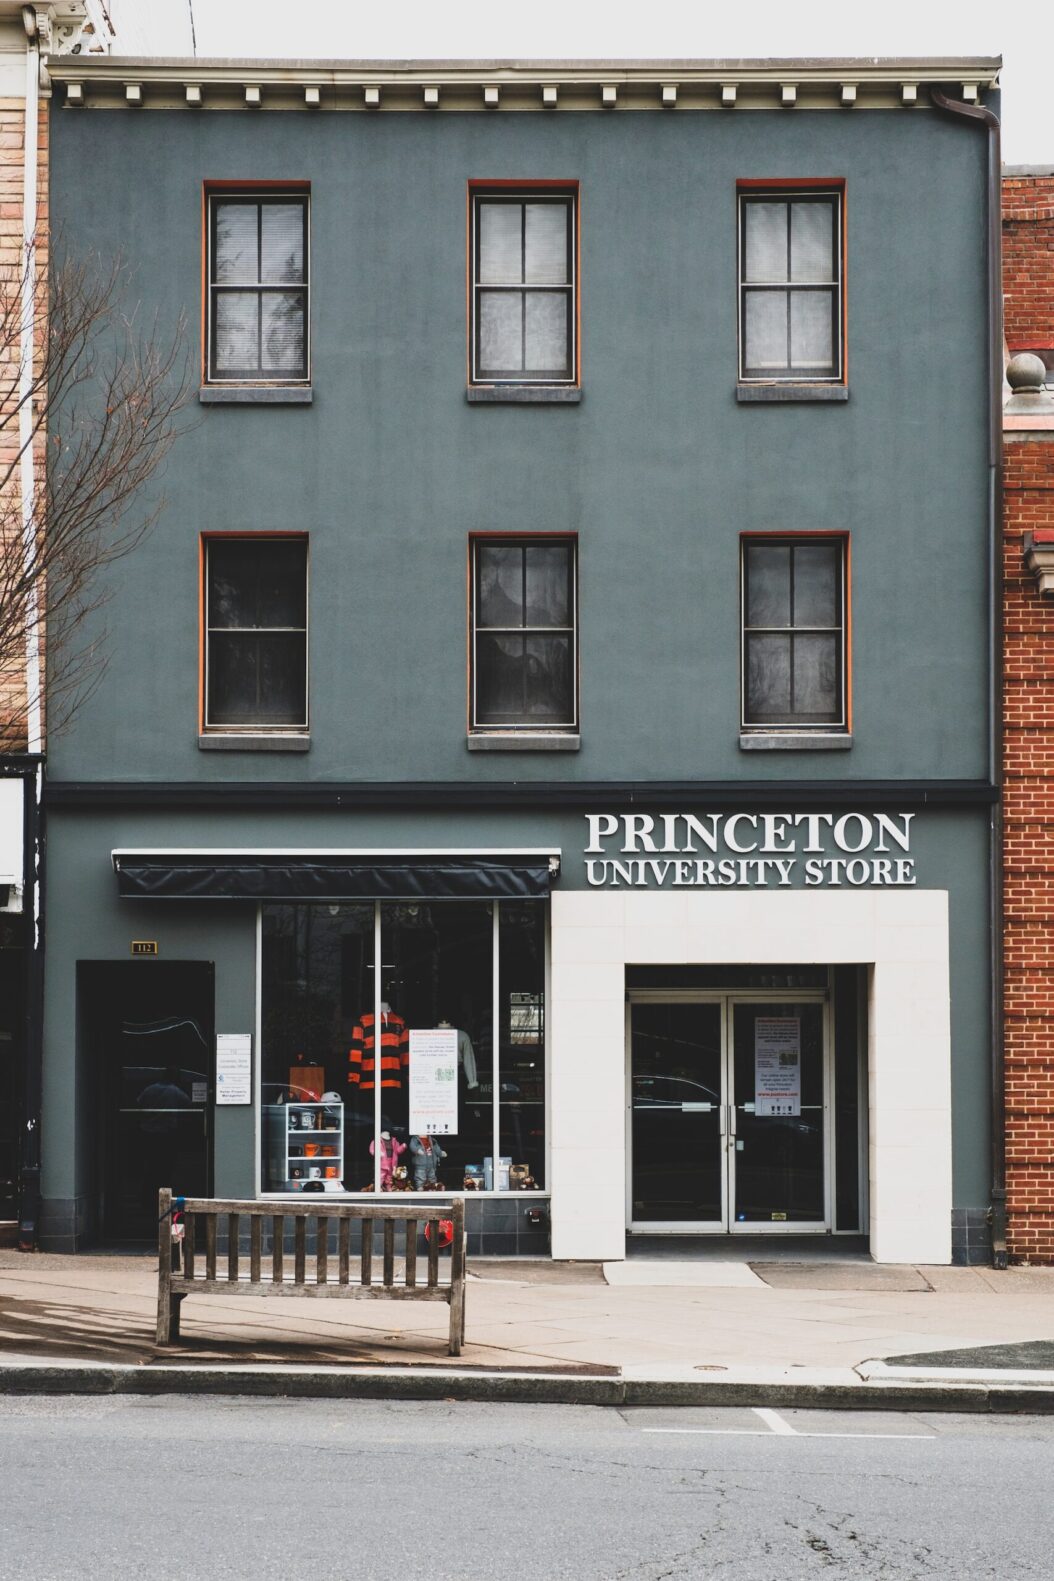 Things to Do in Princeton NJ